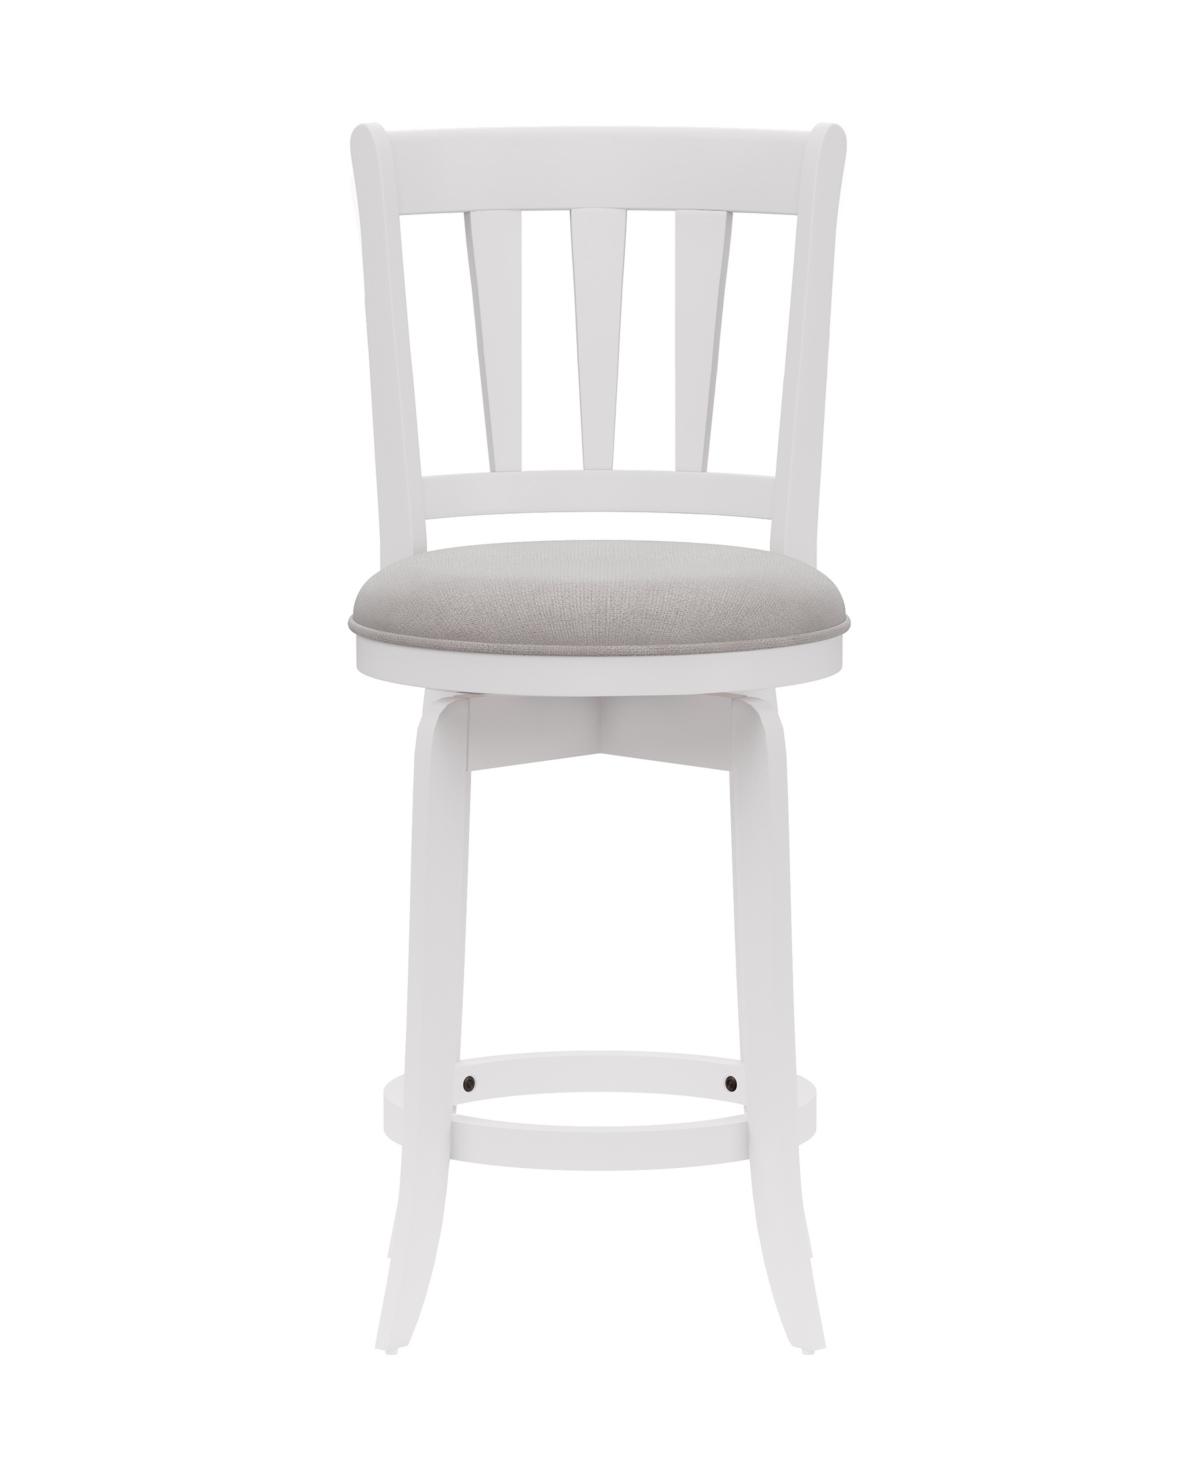 Hillsdale 39" Wood Presque Isle Furniture Counter Height Swivel Stool In White